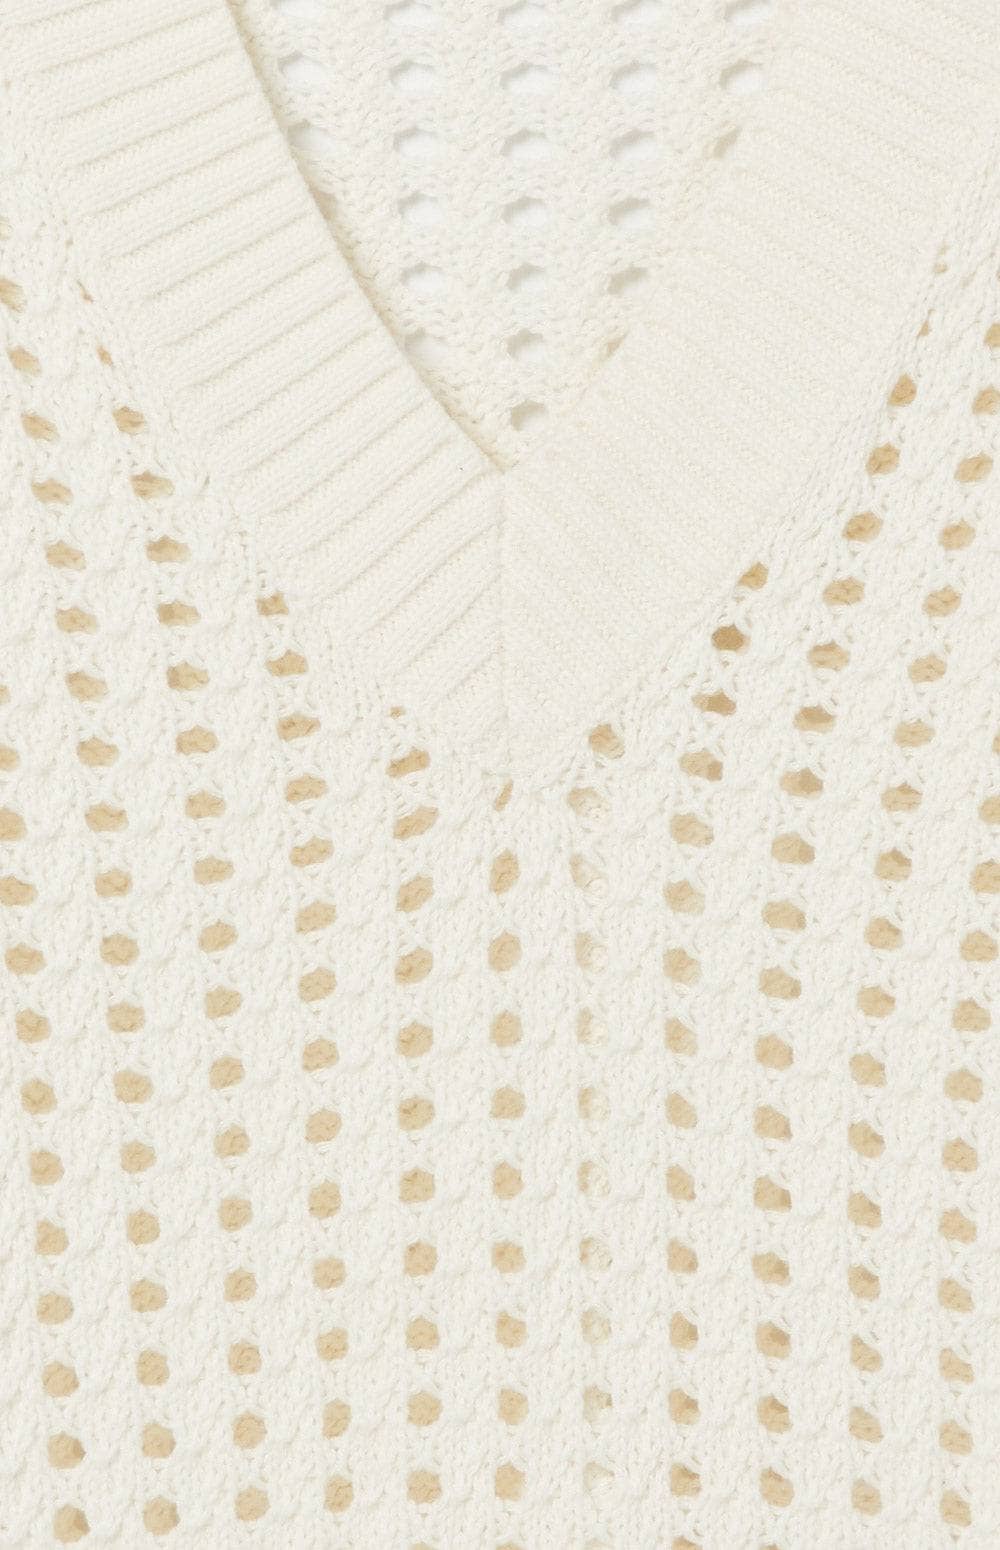 Alp N Rock Womens Sweater Kinna Cable Knit Sweater | Off White